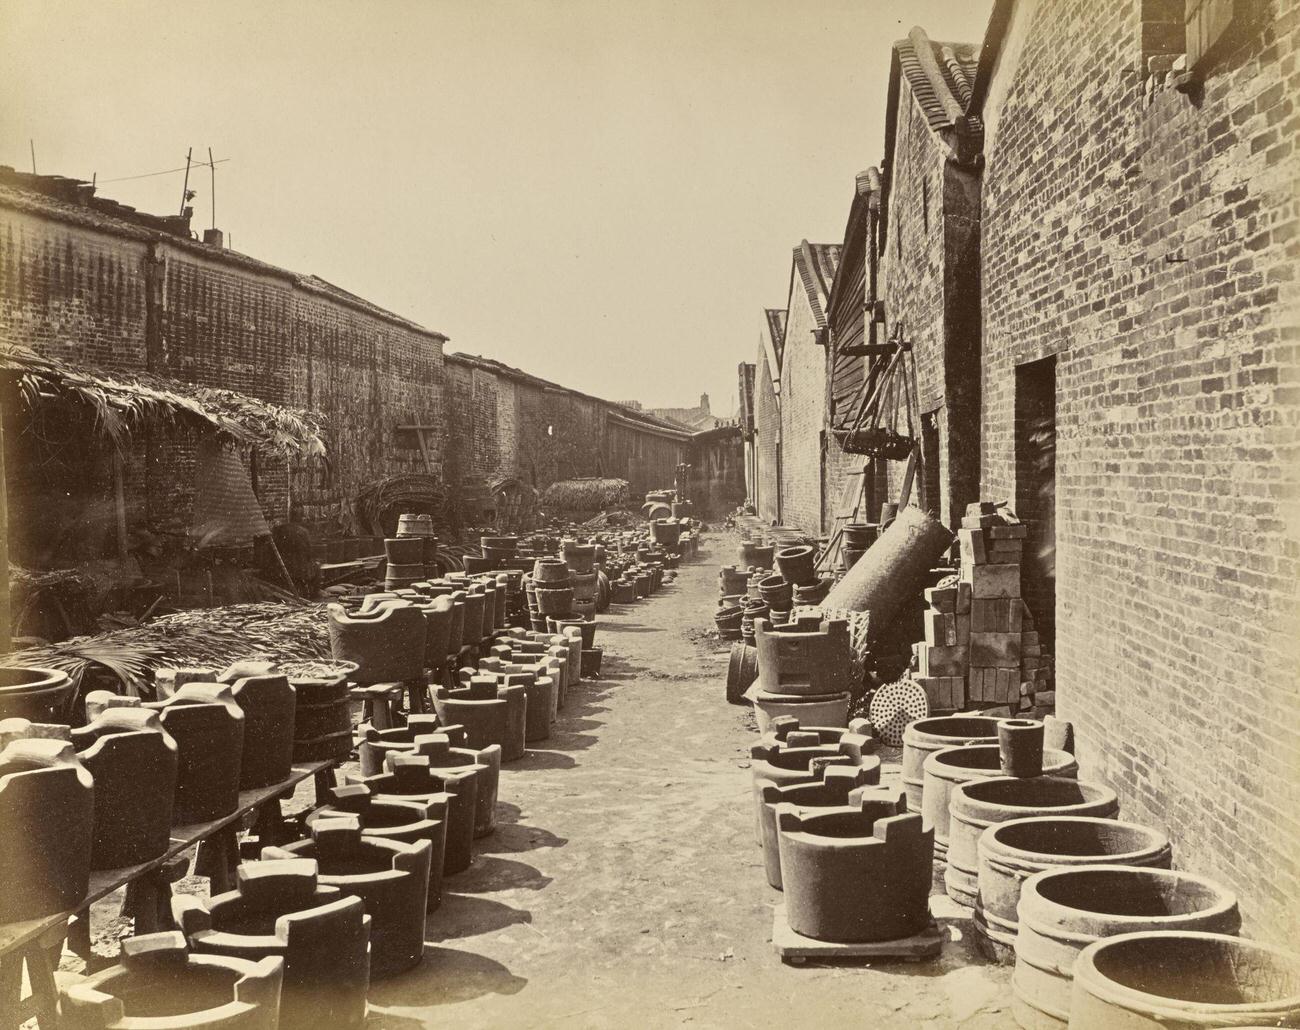 Alley Bordered by Brick Buildings, China, ca. 1870